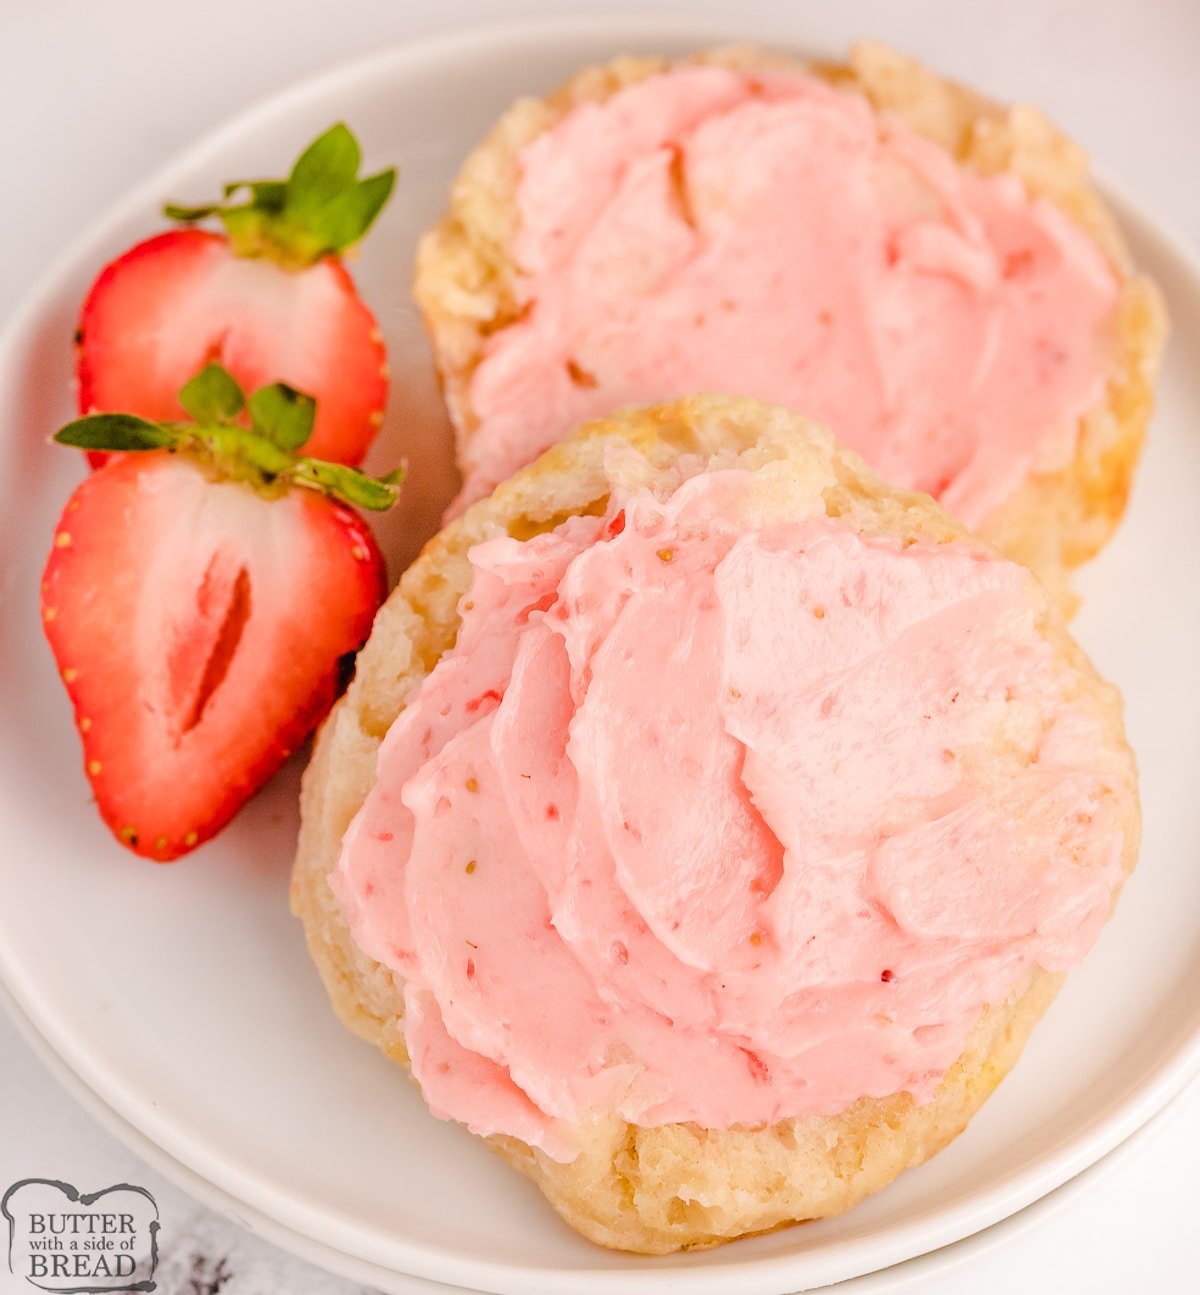 homemade biscuits topped with strawberry butter